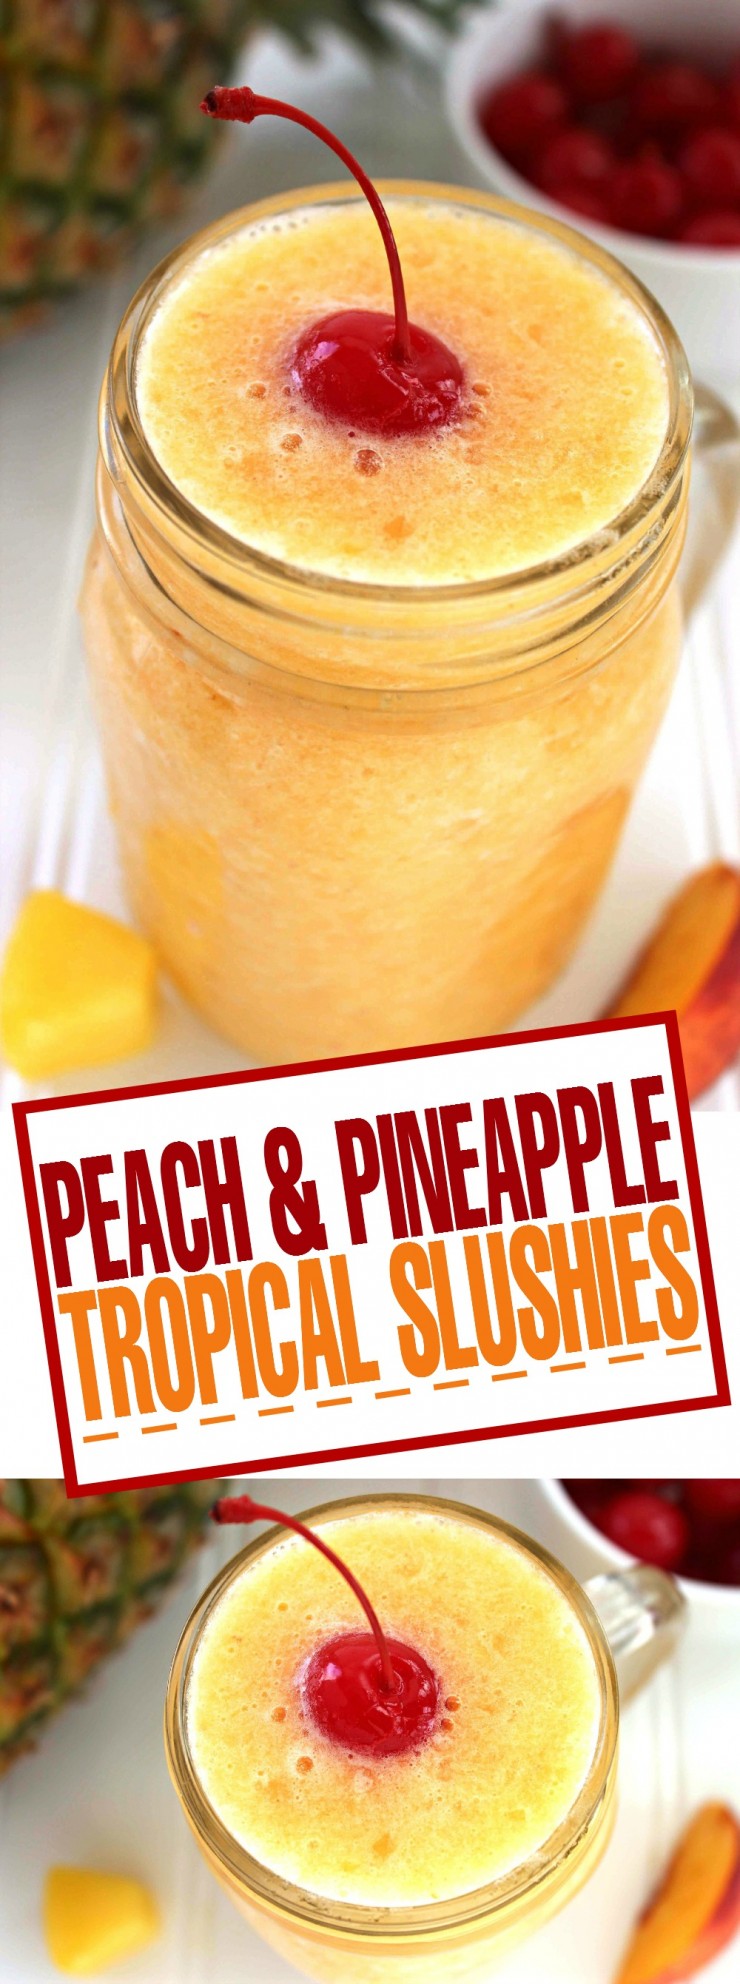 With summer on the way, these Peach & Pineapple Tropical Slushies are the perfect drink to help you cool down.